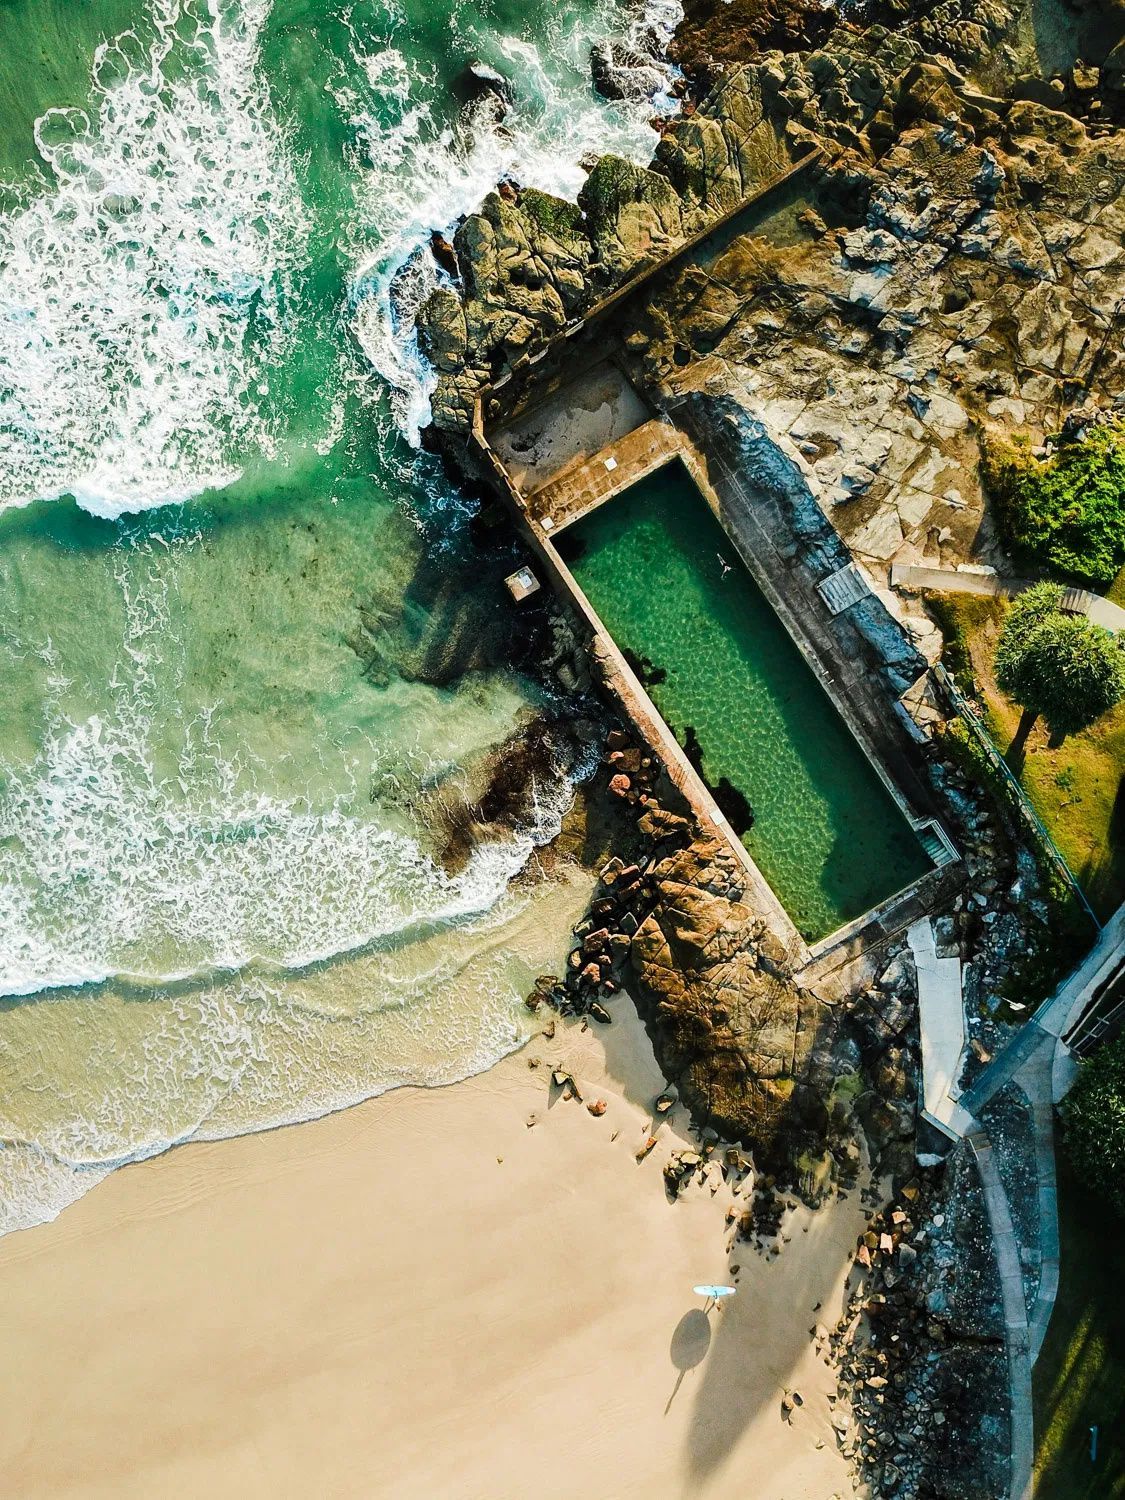 7 Shots to Incorporate for Better Drone Photography